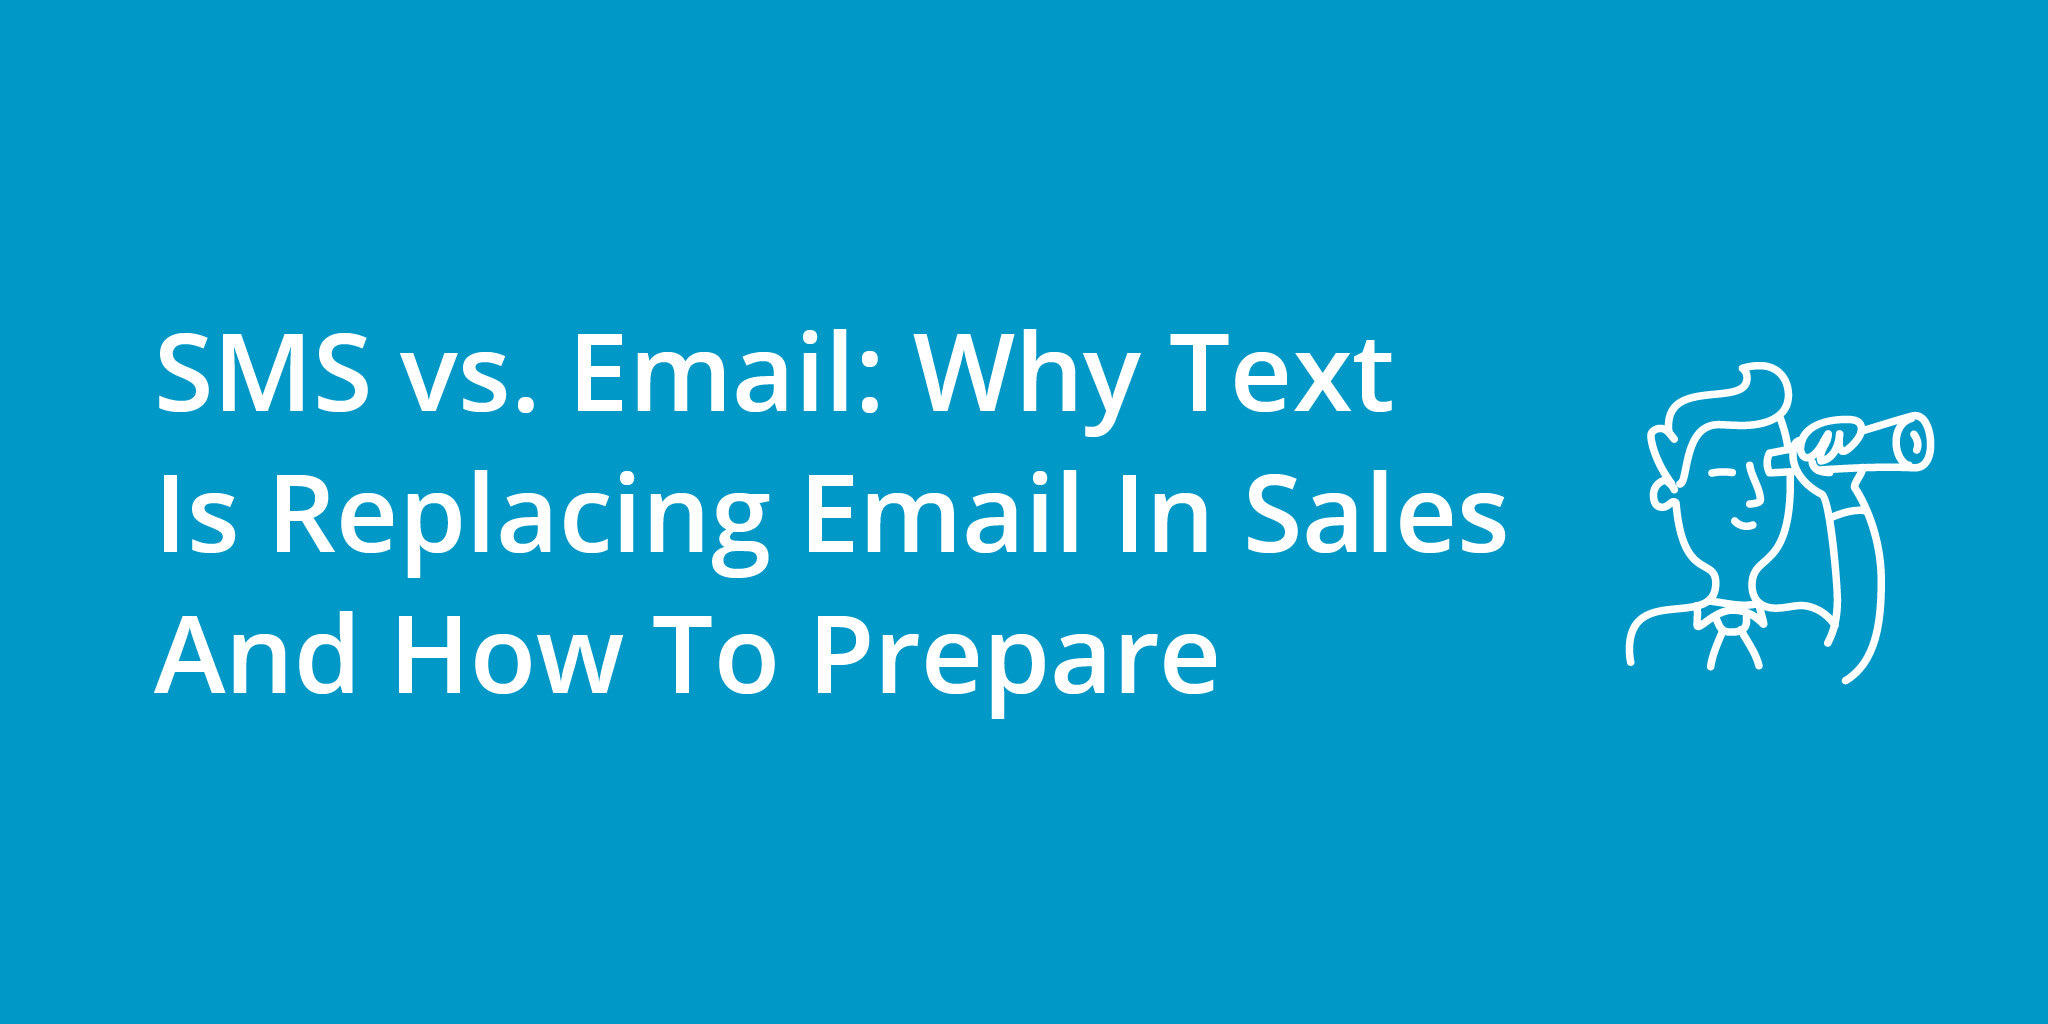 SMS vs. Email: Why Text Is Replacing Email In Sales And How To Prepare